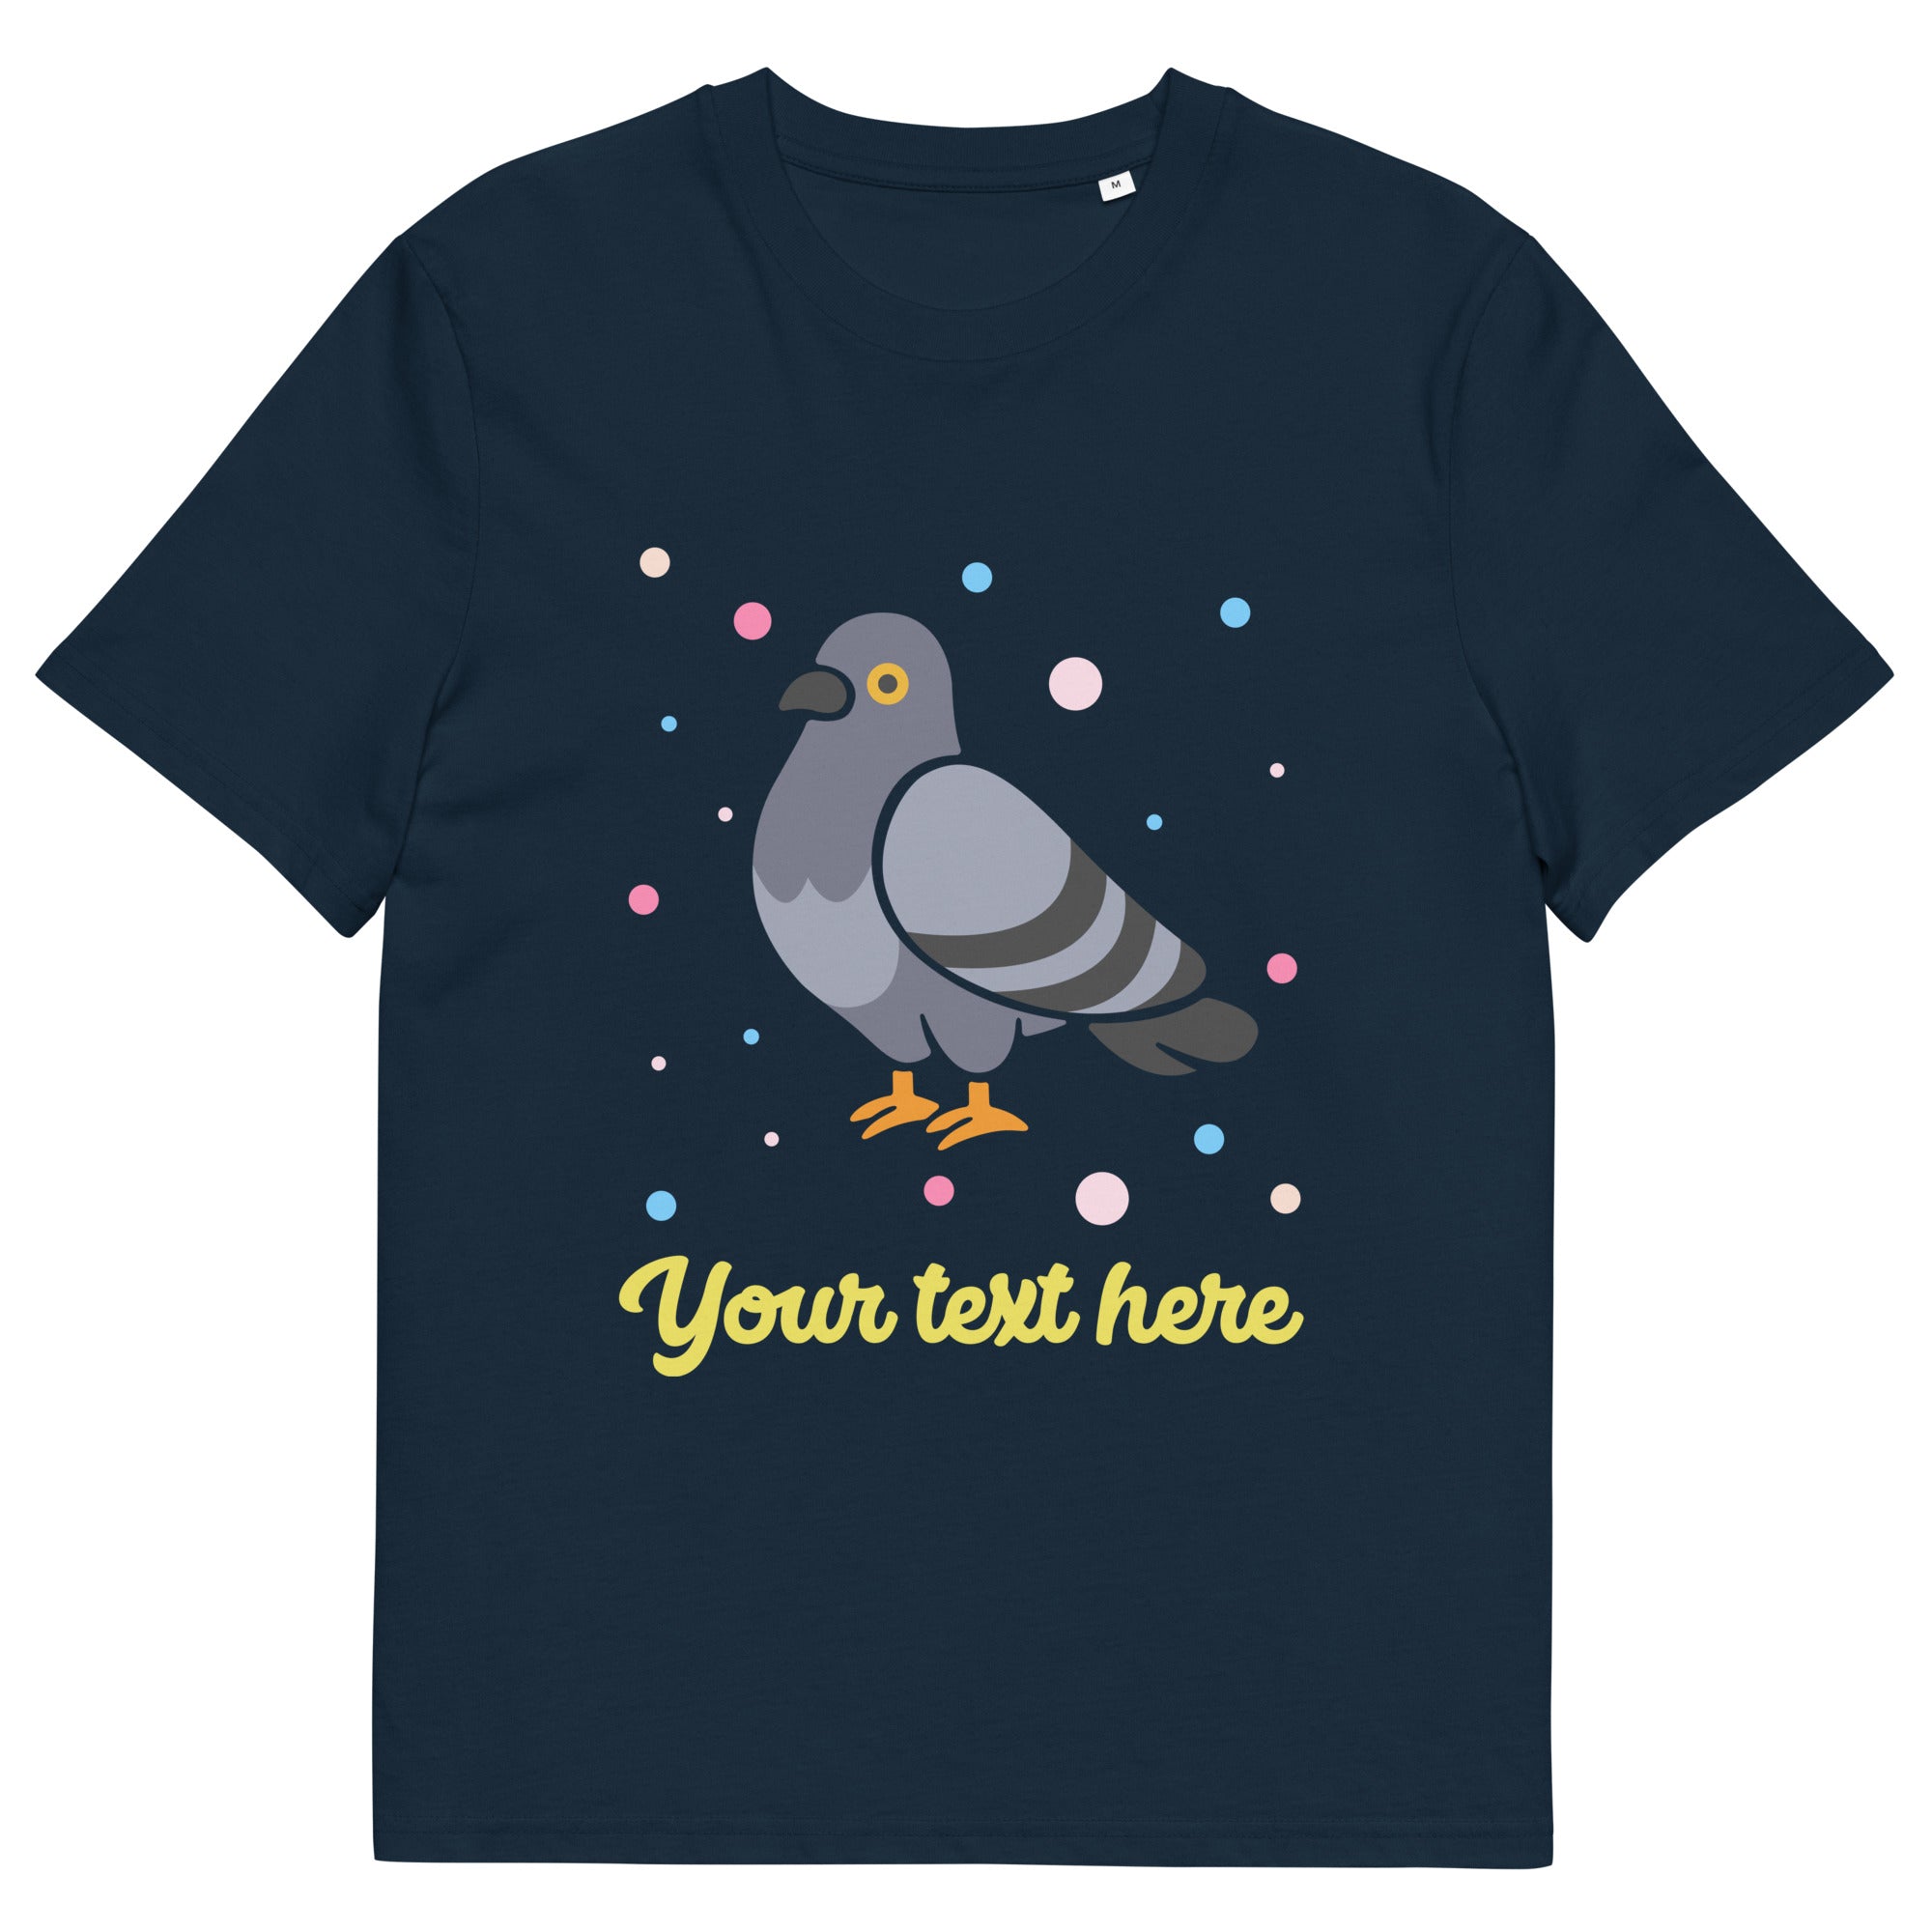 Personalised Custom Text - Organic Cotton Adults Unisex T-Shirt - London Doodles - Pigeon - Navy